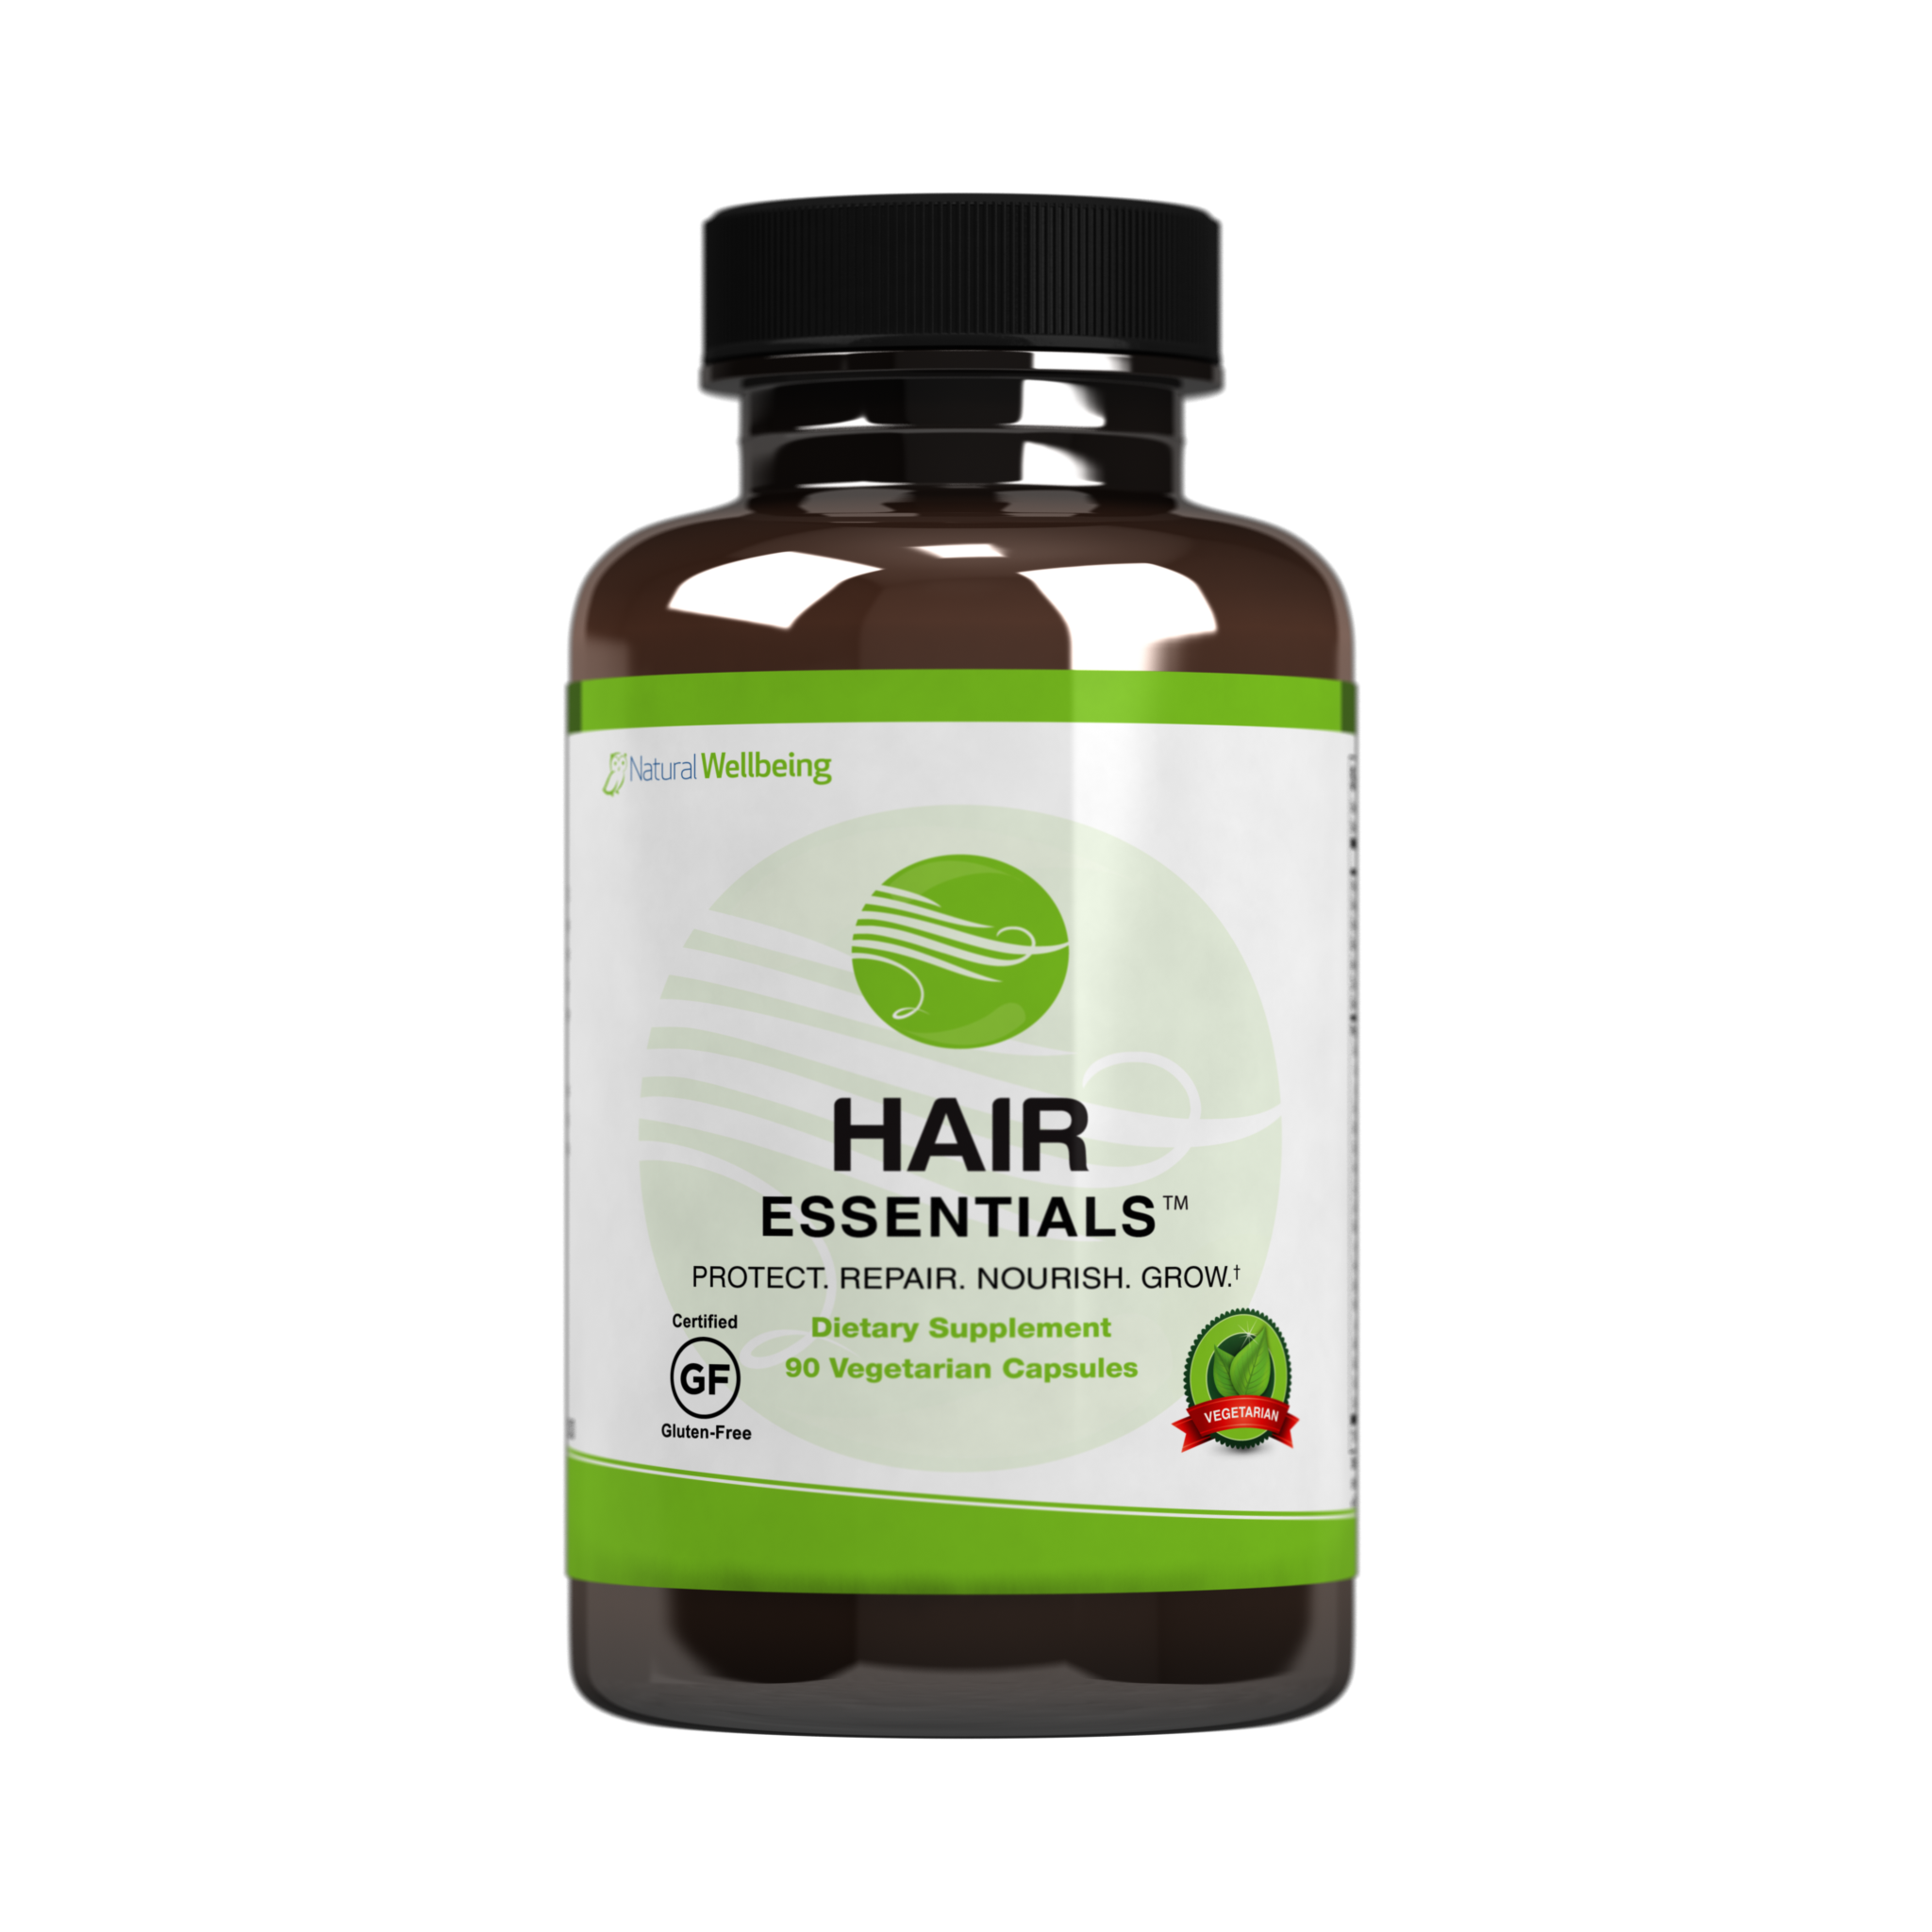 Hair Essentials Launches Fall Promotion